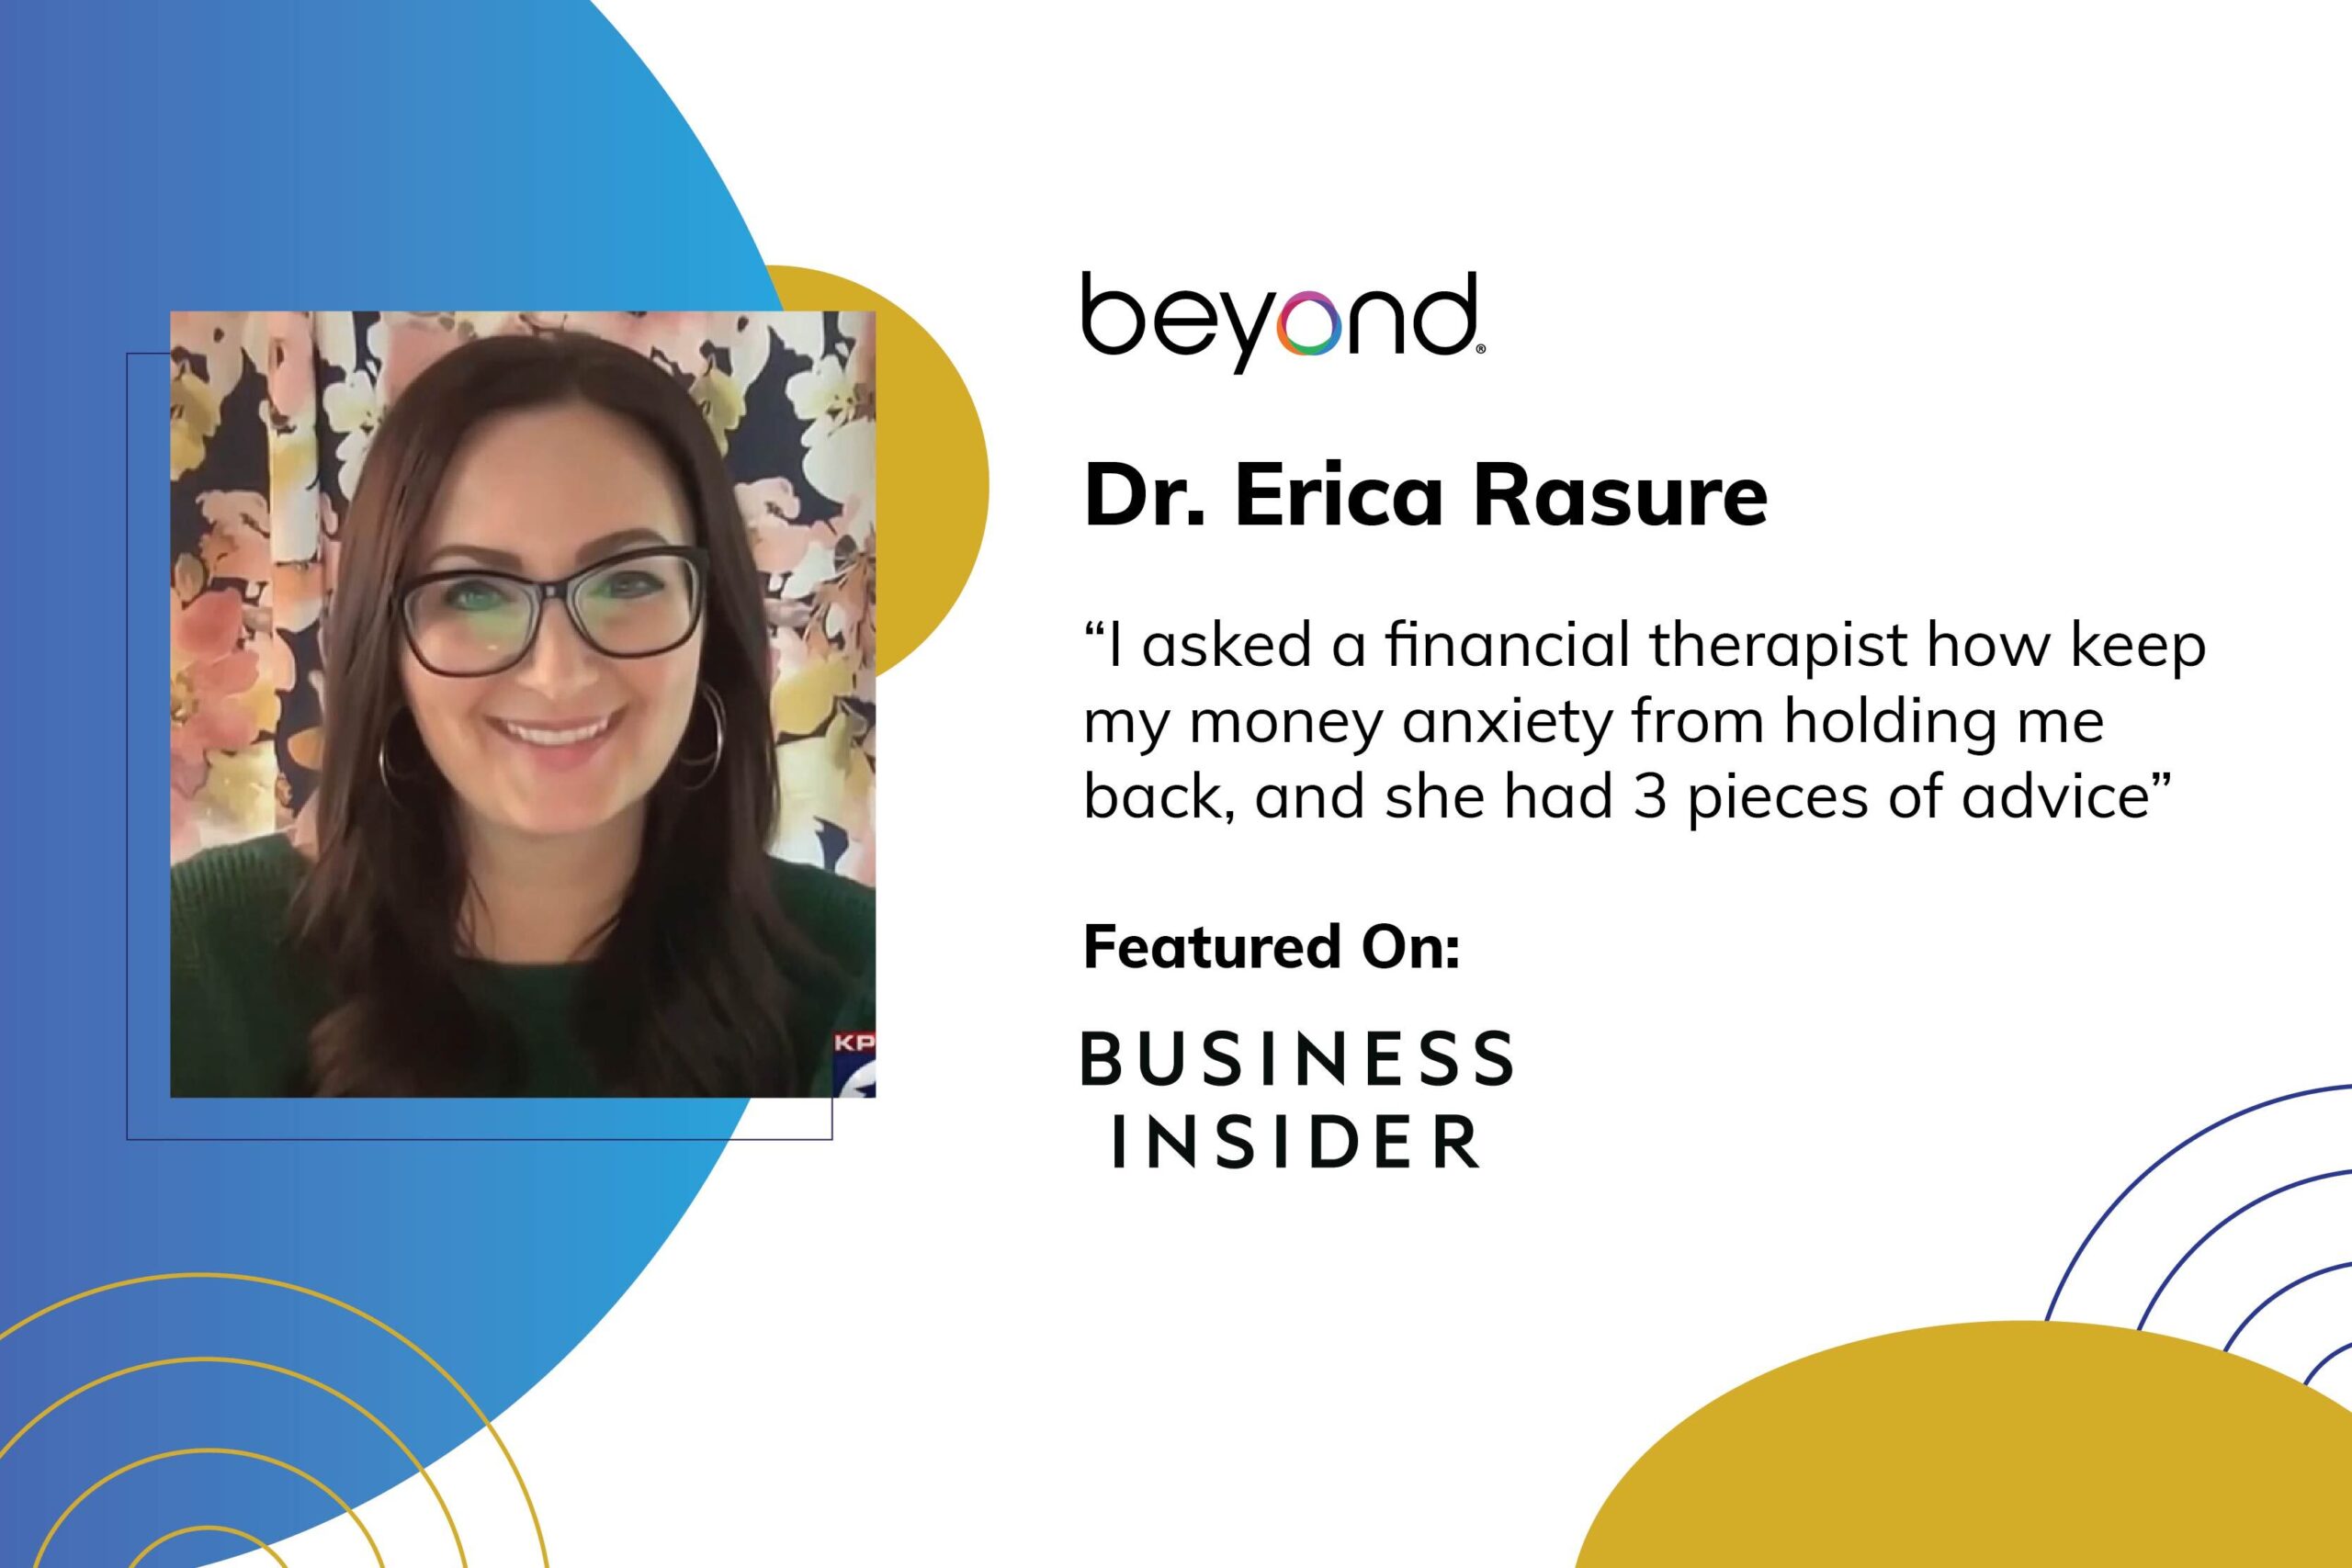 Dr. Erika Rasure and Business Insider talks about financial therapy